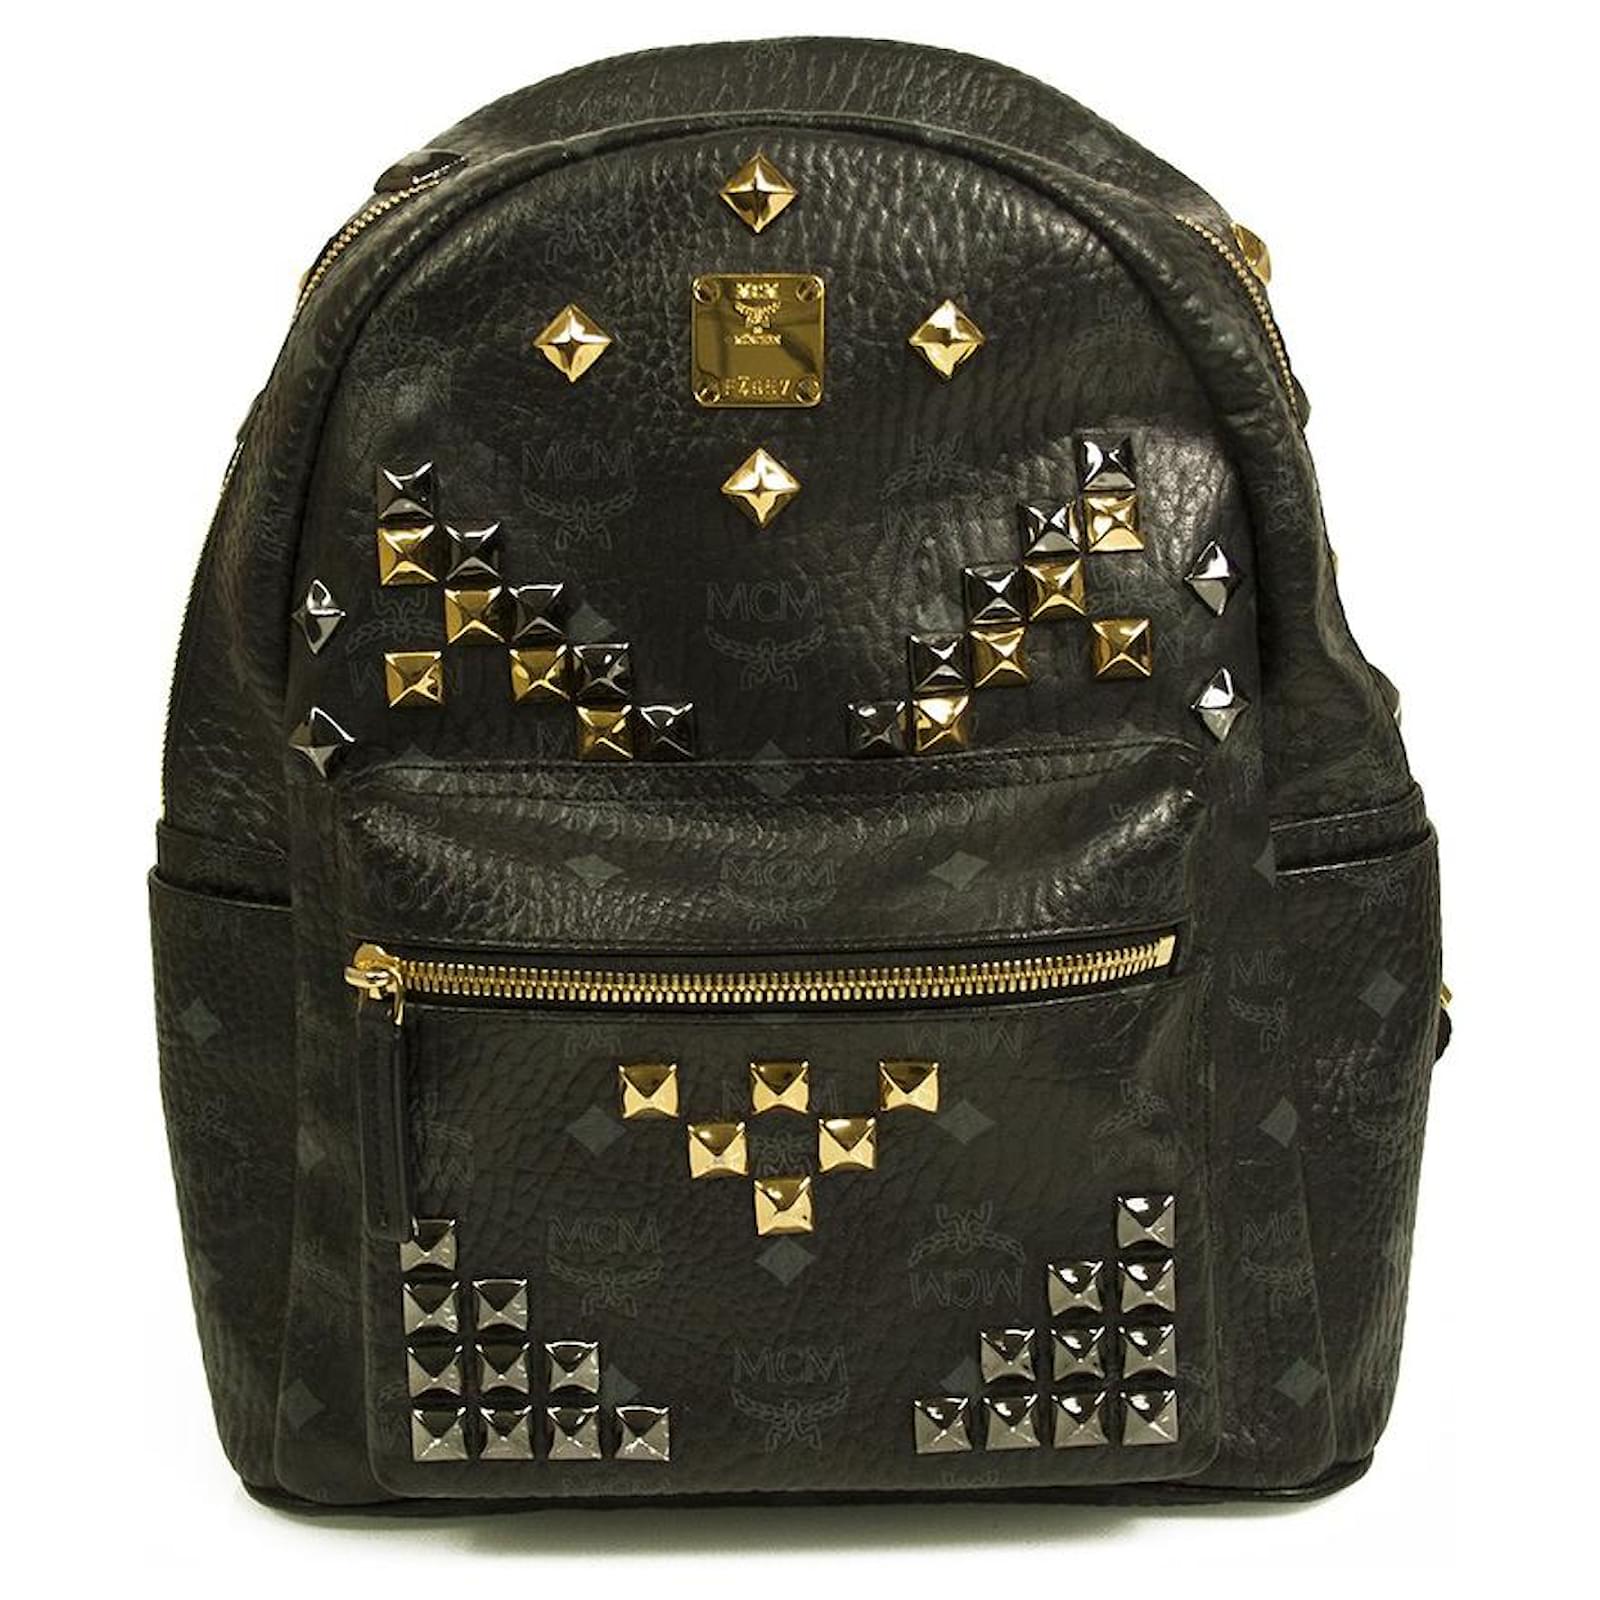 Buy Teanea Rhinestone Studded Leather Flap Backpack Purse Black Crossbody  Shoulder Bag for Women Girls, Gold, Small, Daypack Backpacks at Amazon.in